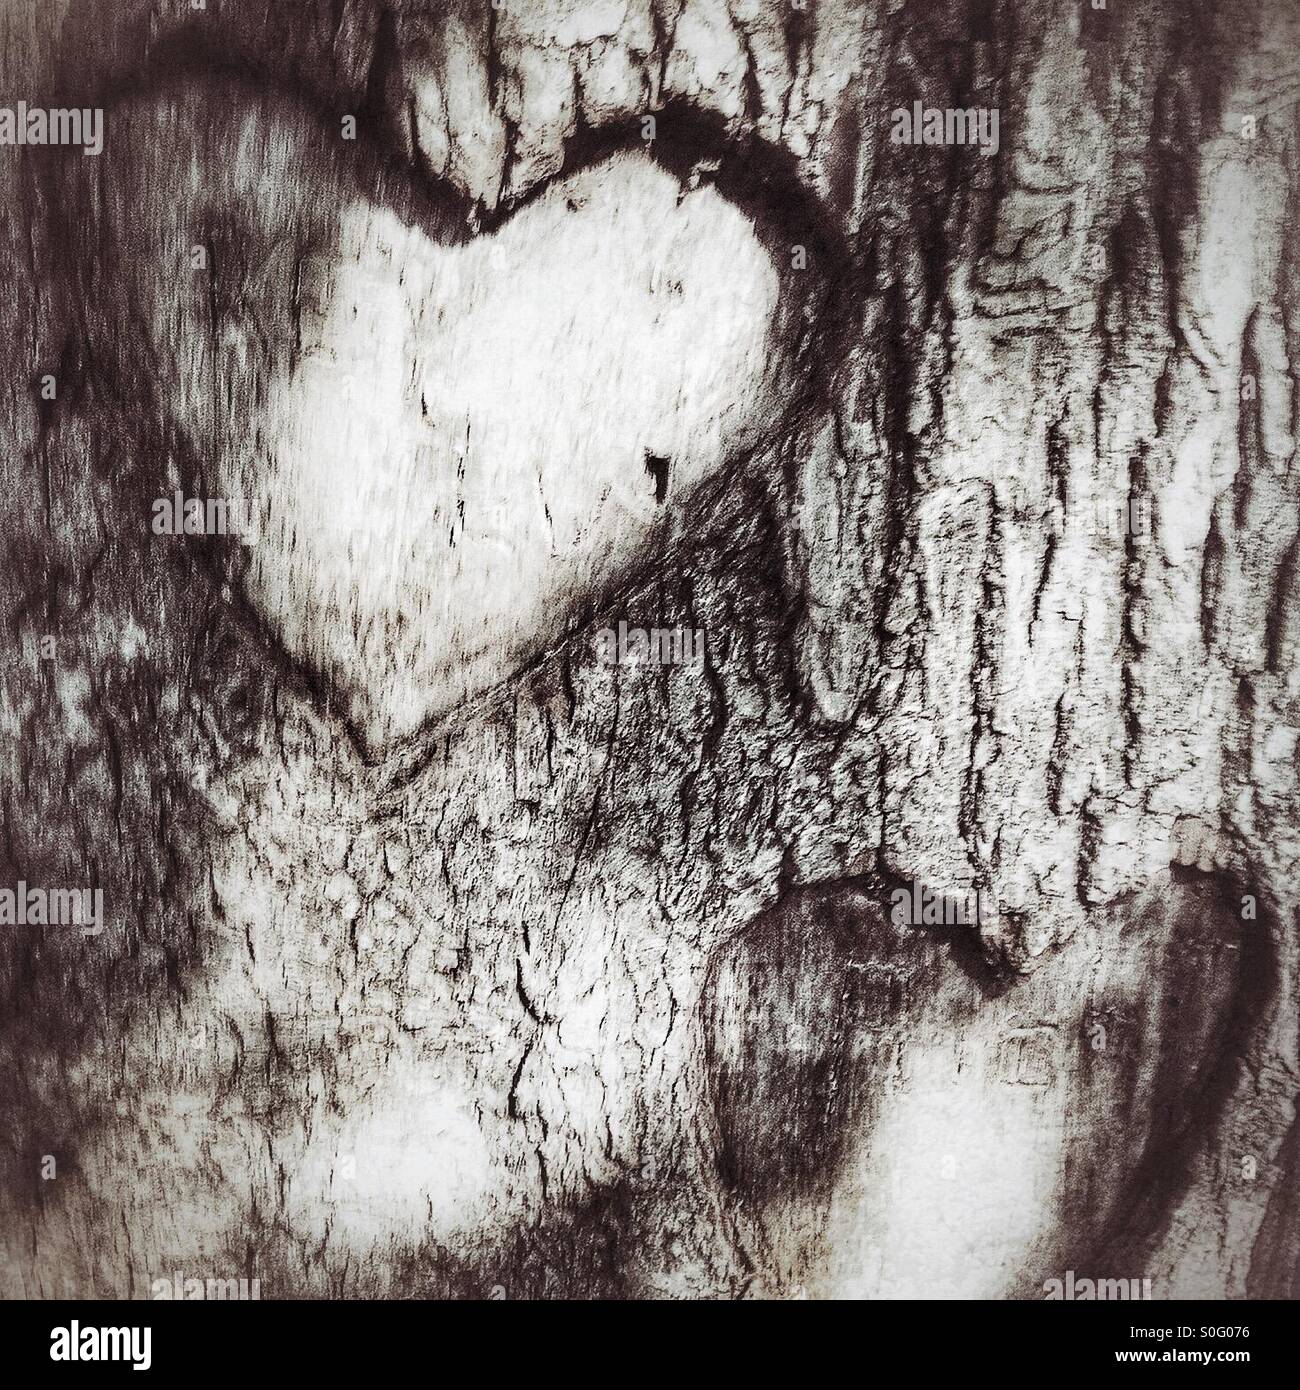 Hearts carved in a tree Stock Photo